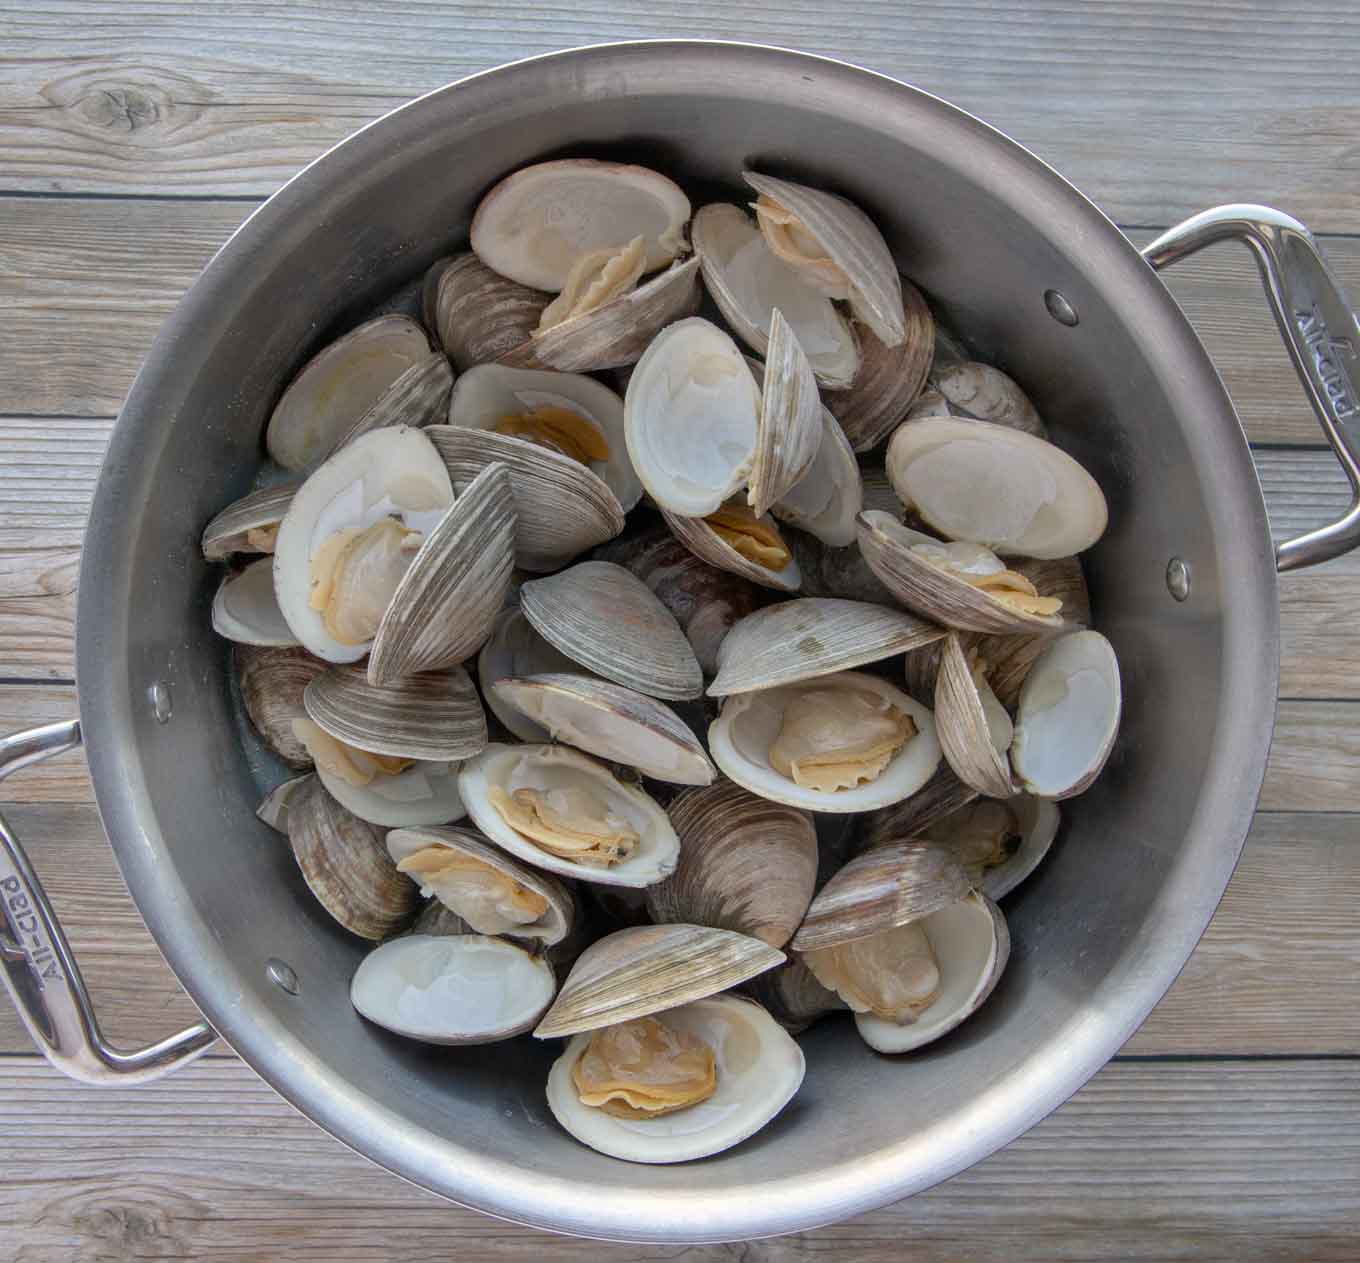 steam whole clams in stock pot